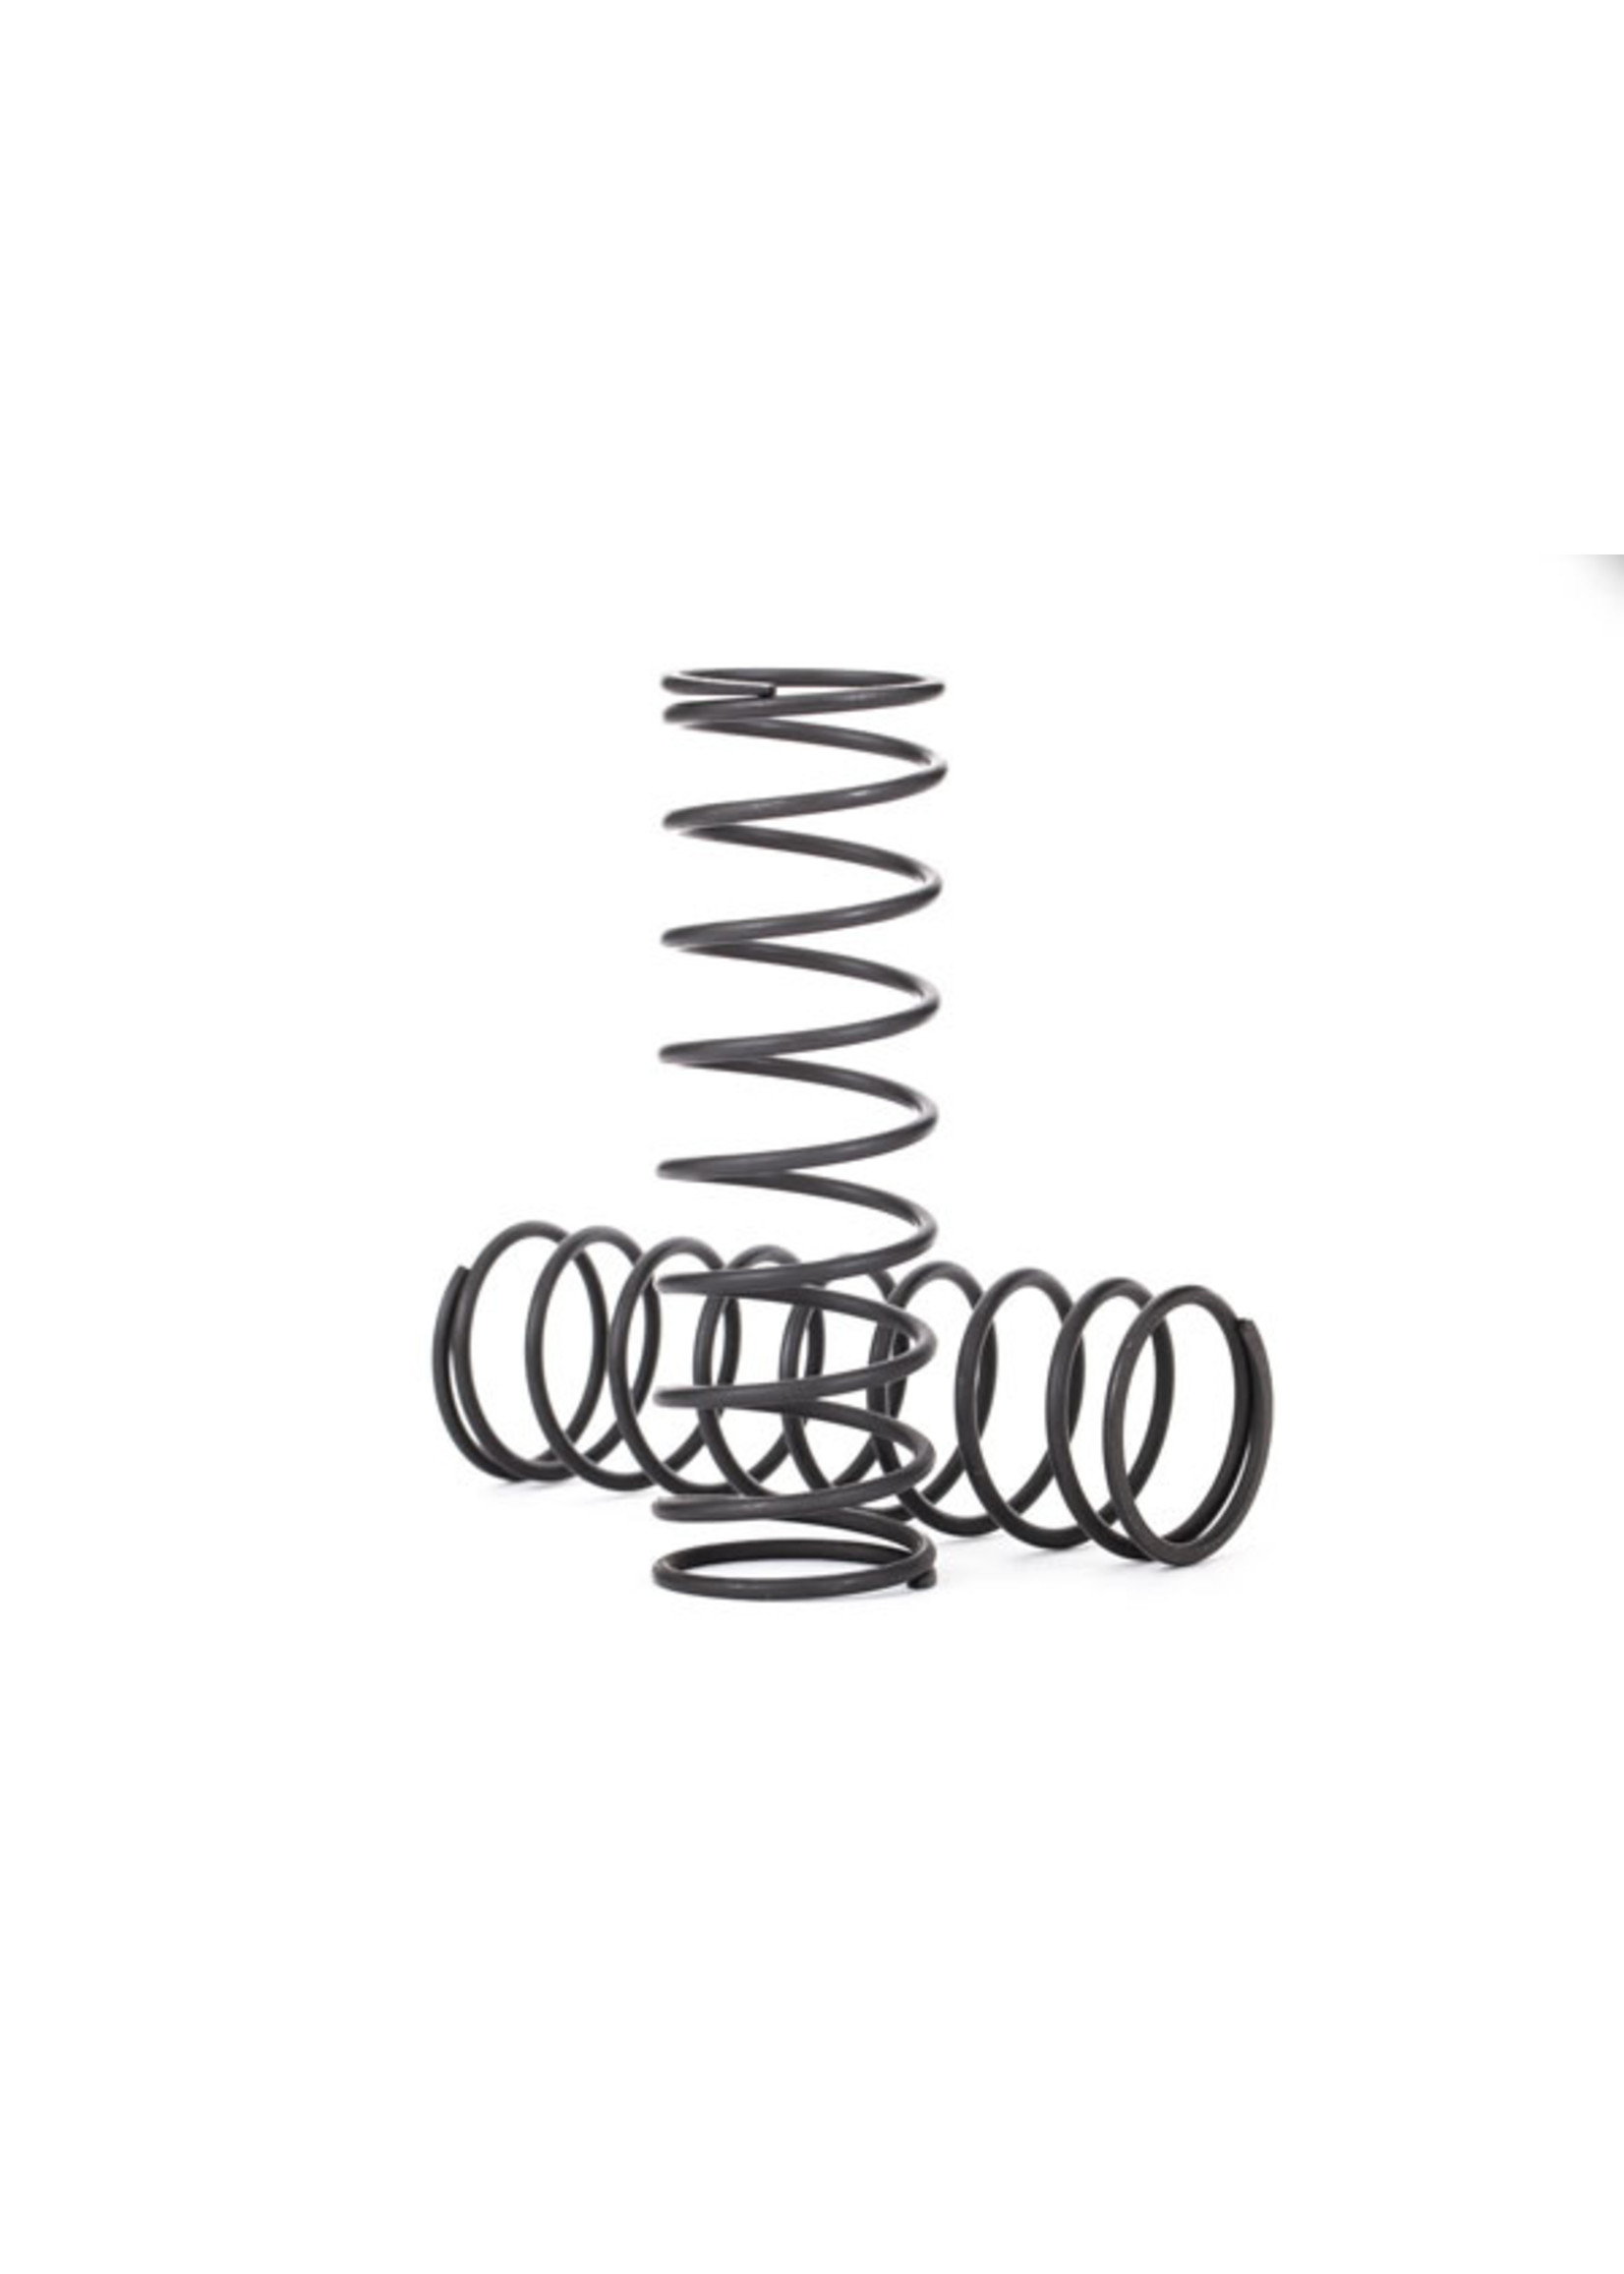 Traxxas 9657 - Shock Springs, 1.671 Rate (GT-Maxx) Natural Finish